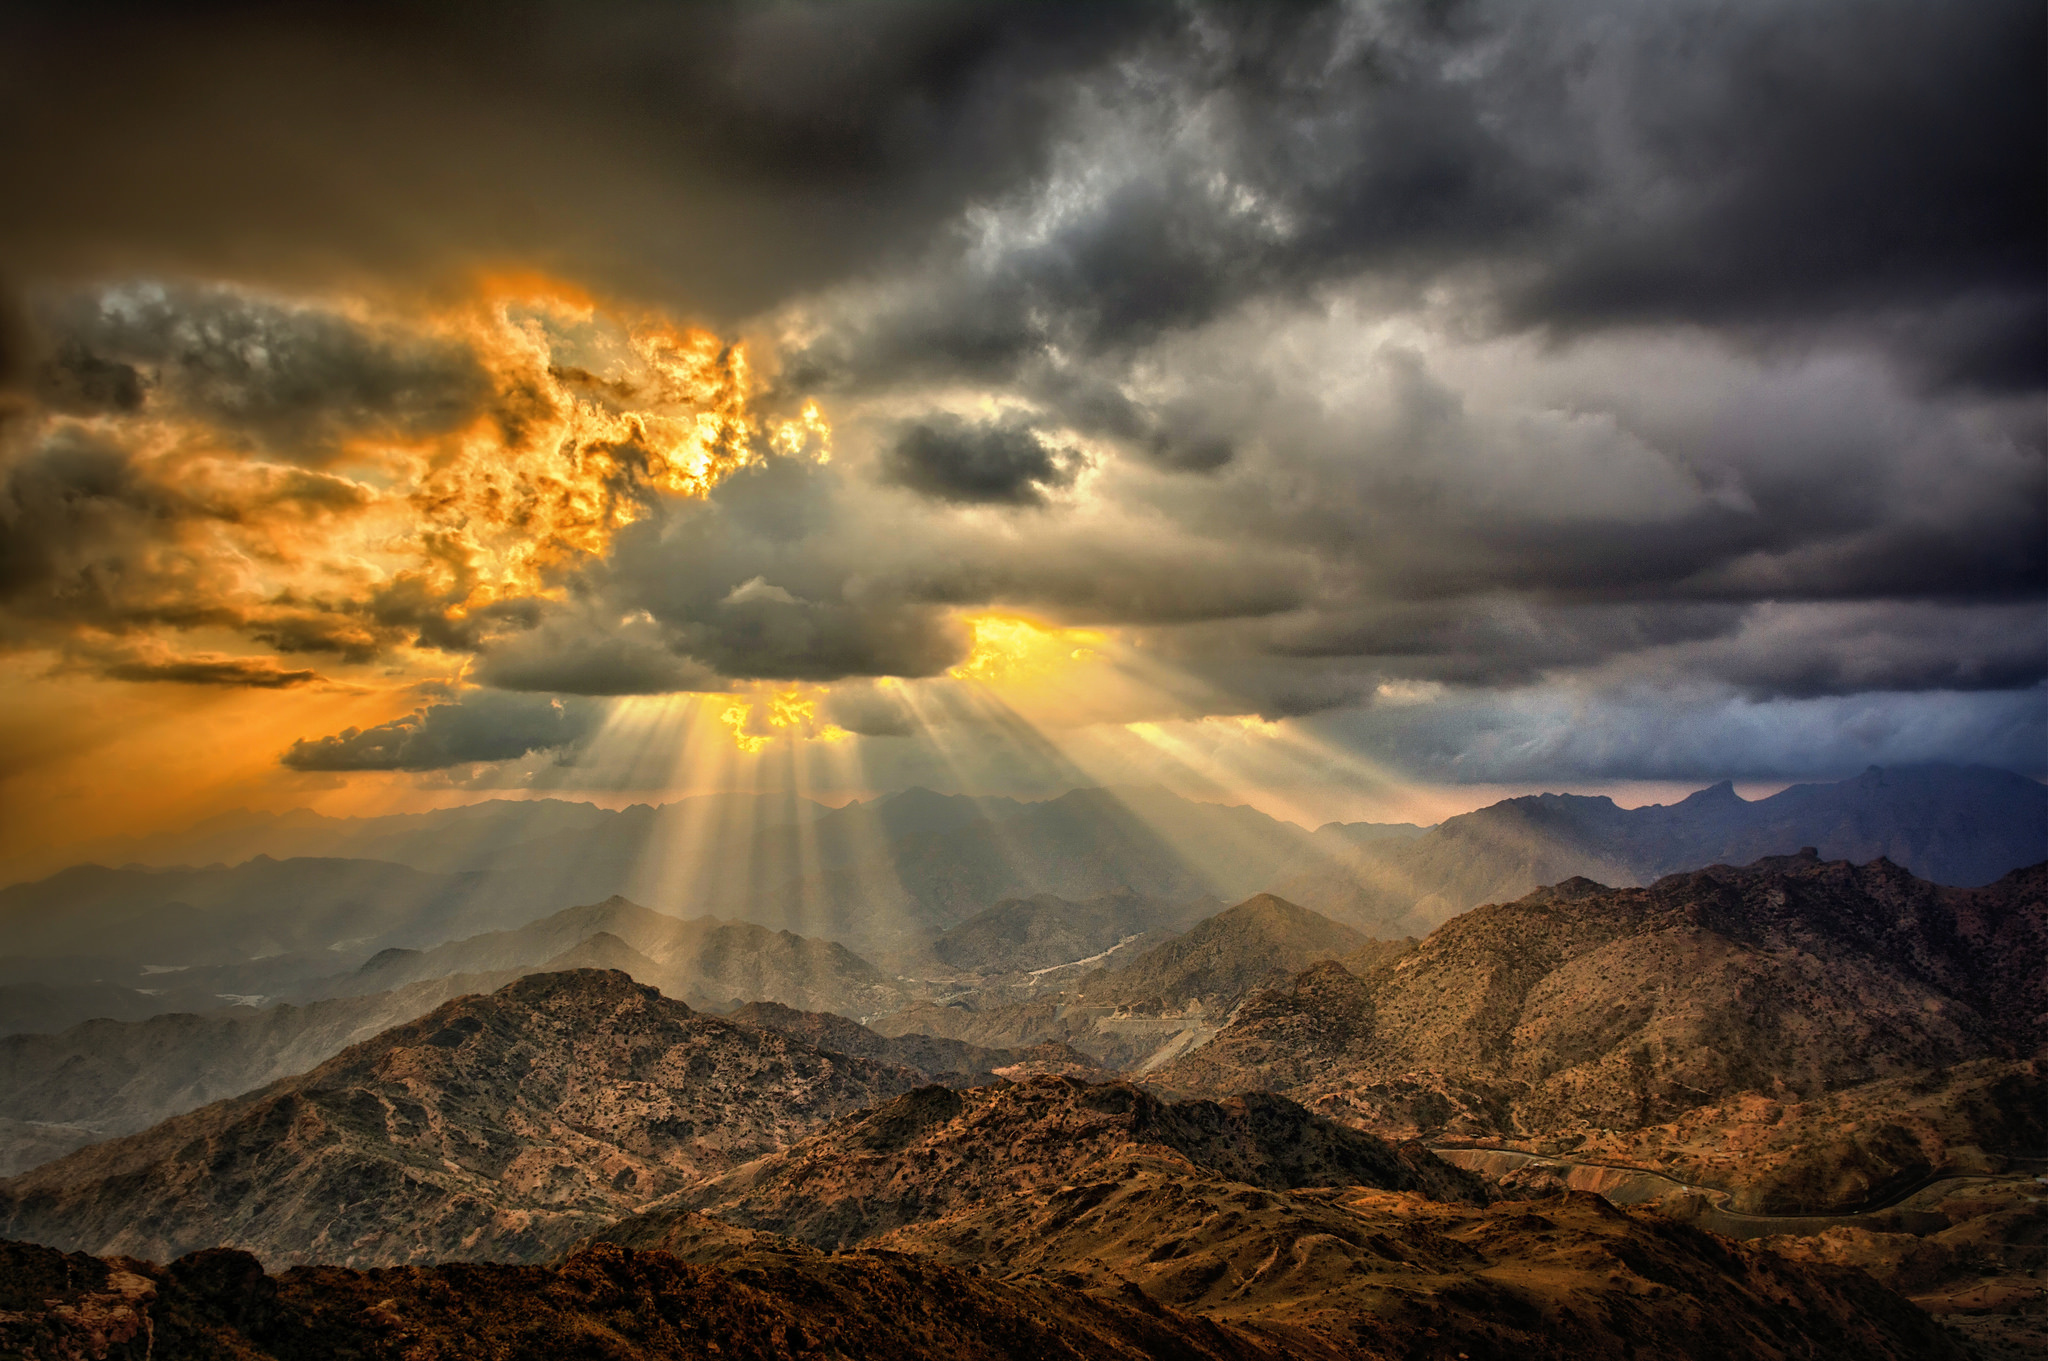 Sun Shining Behind Clouds Hd Wallpaper Background Image 2048x1361